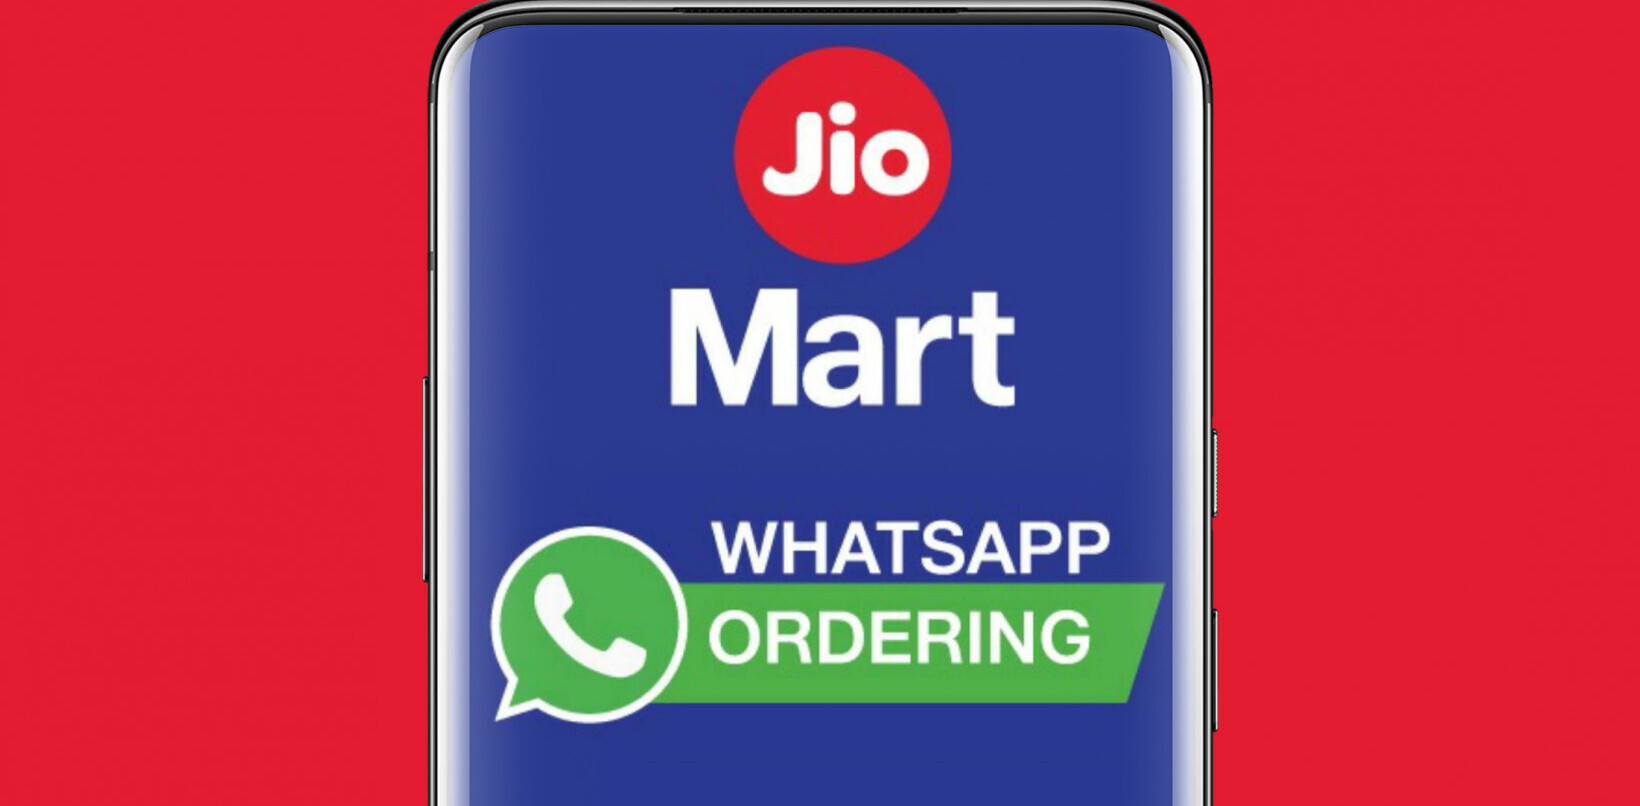 Facebook-backed Reliance Jio pilots basic grocery ordering service on WhatsApp in India